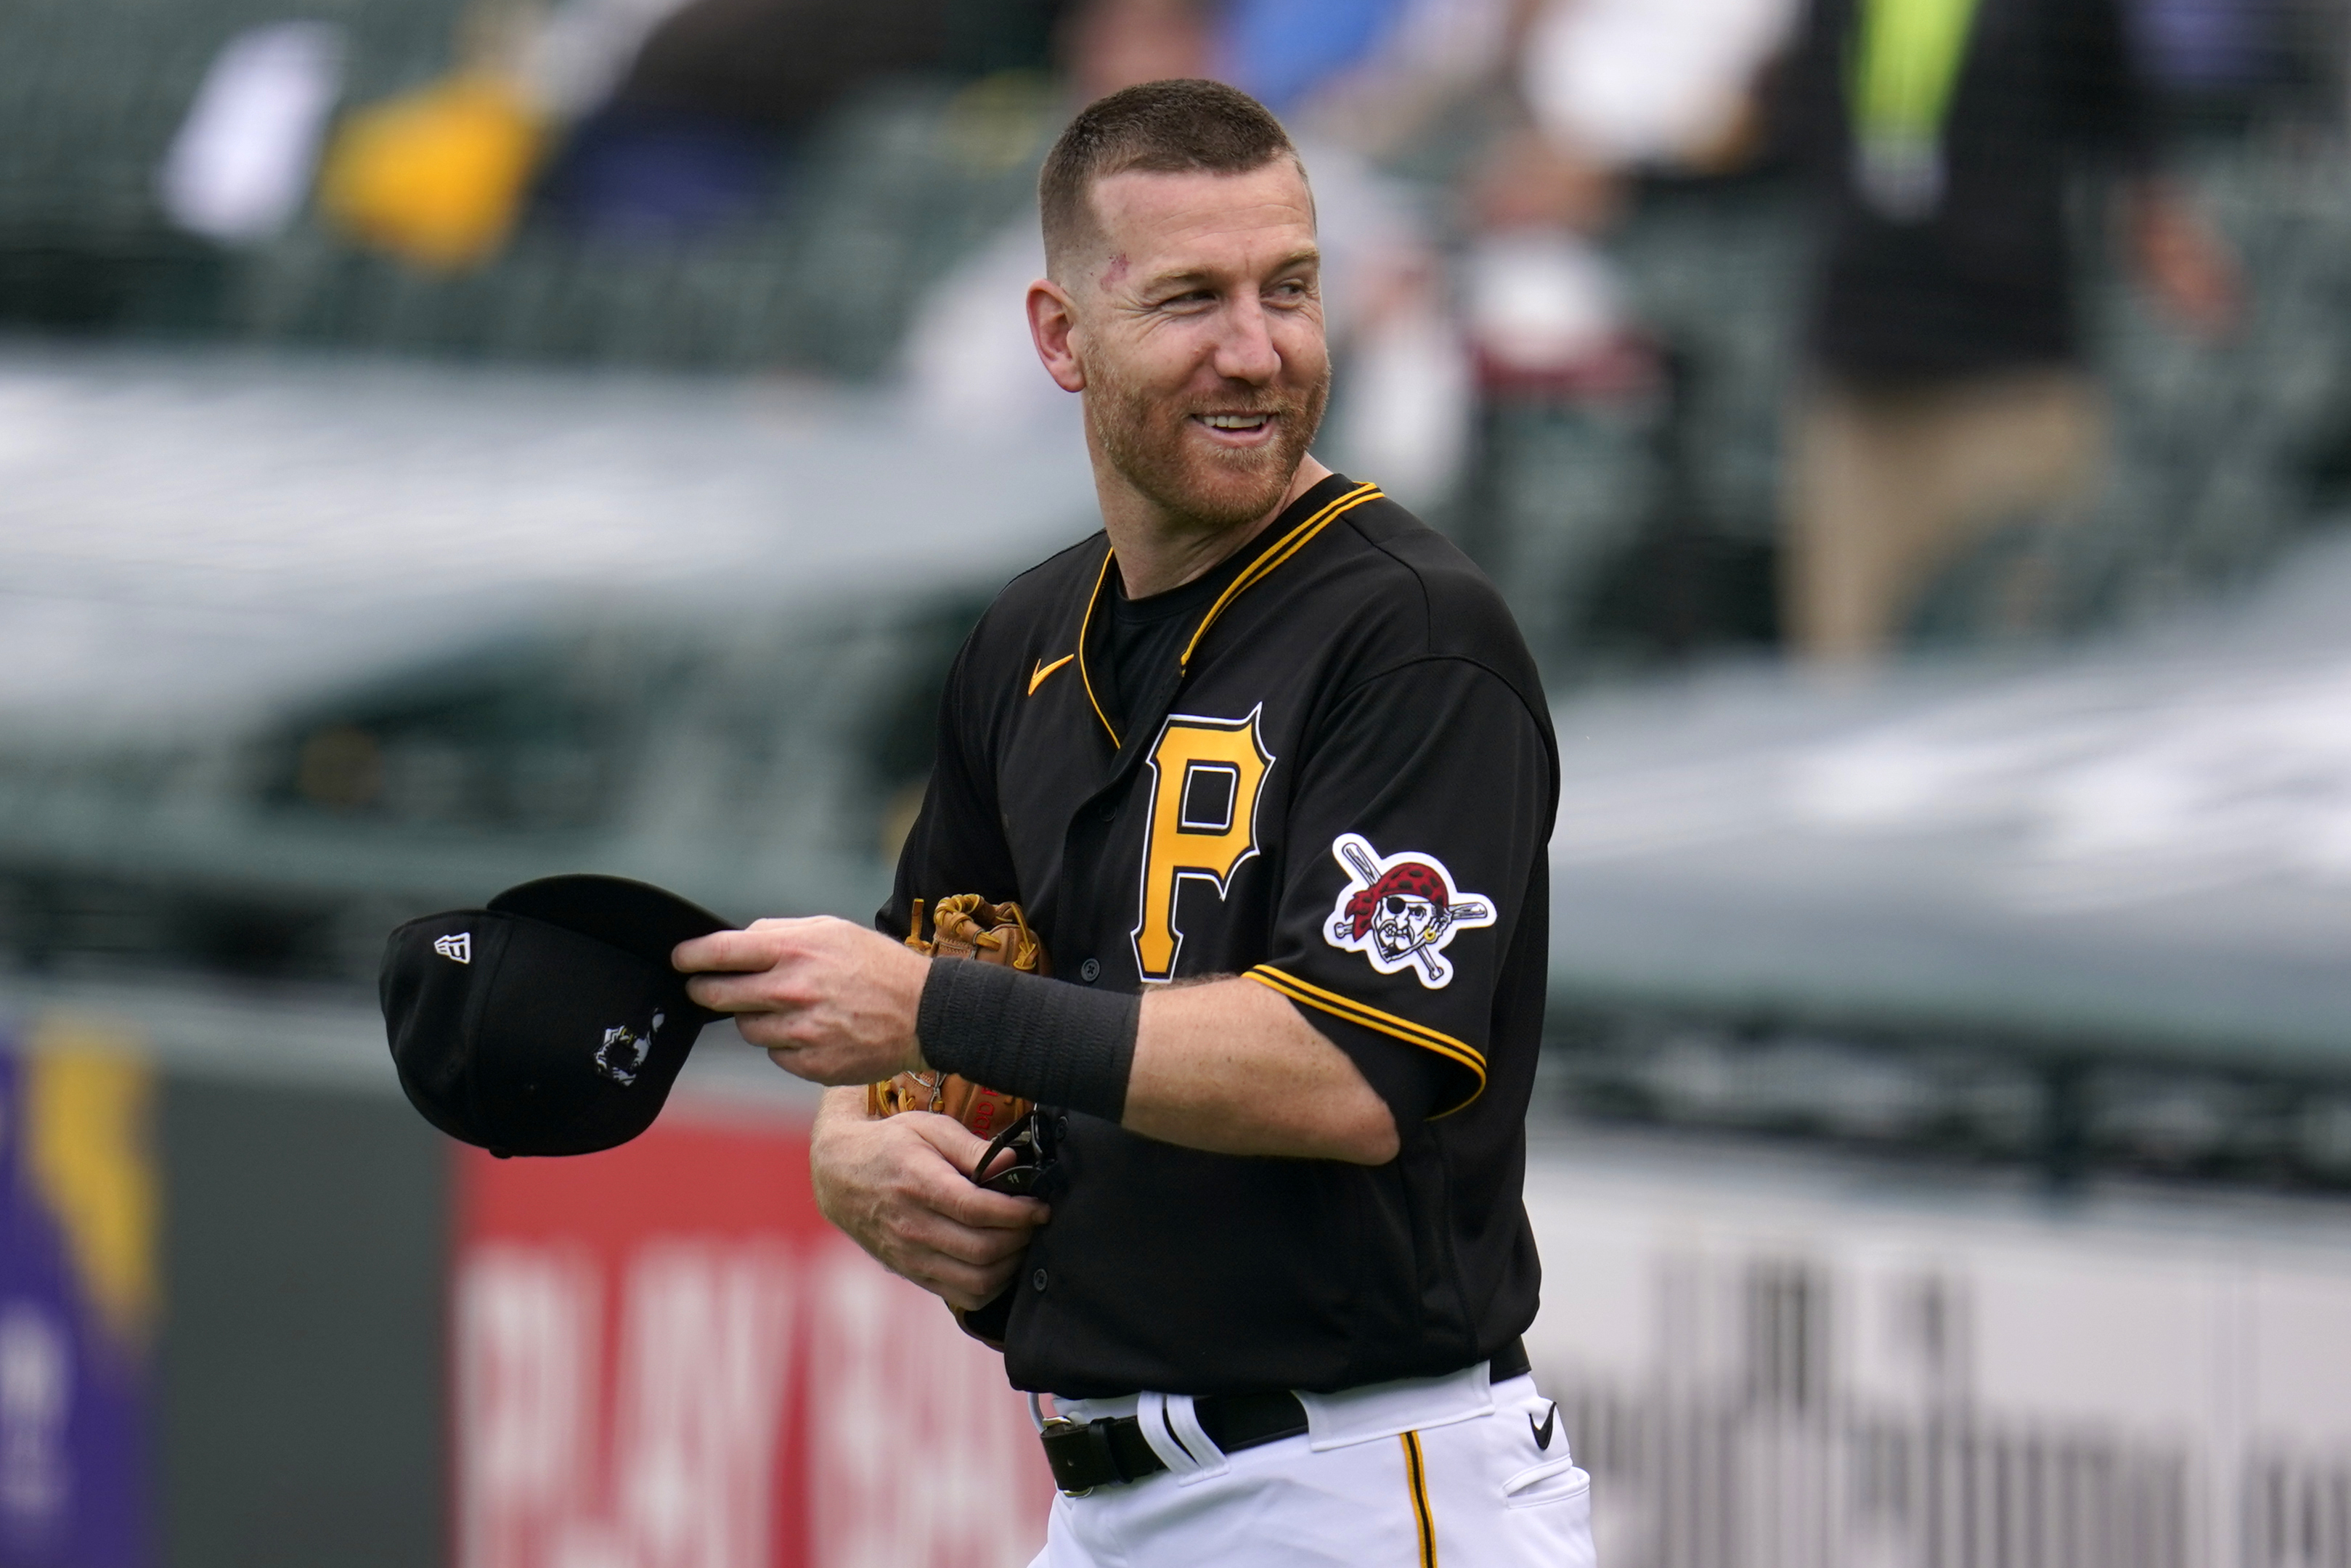 New York Yankees: Why is Todd Frazier still a free agent?